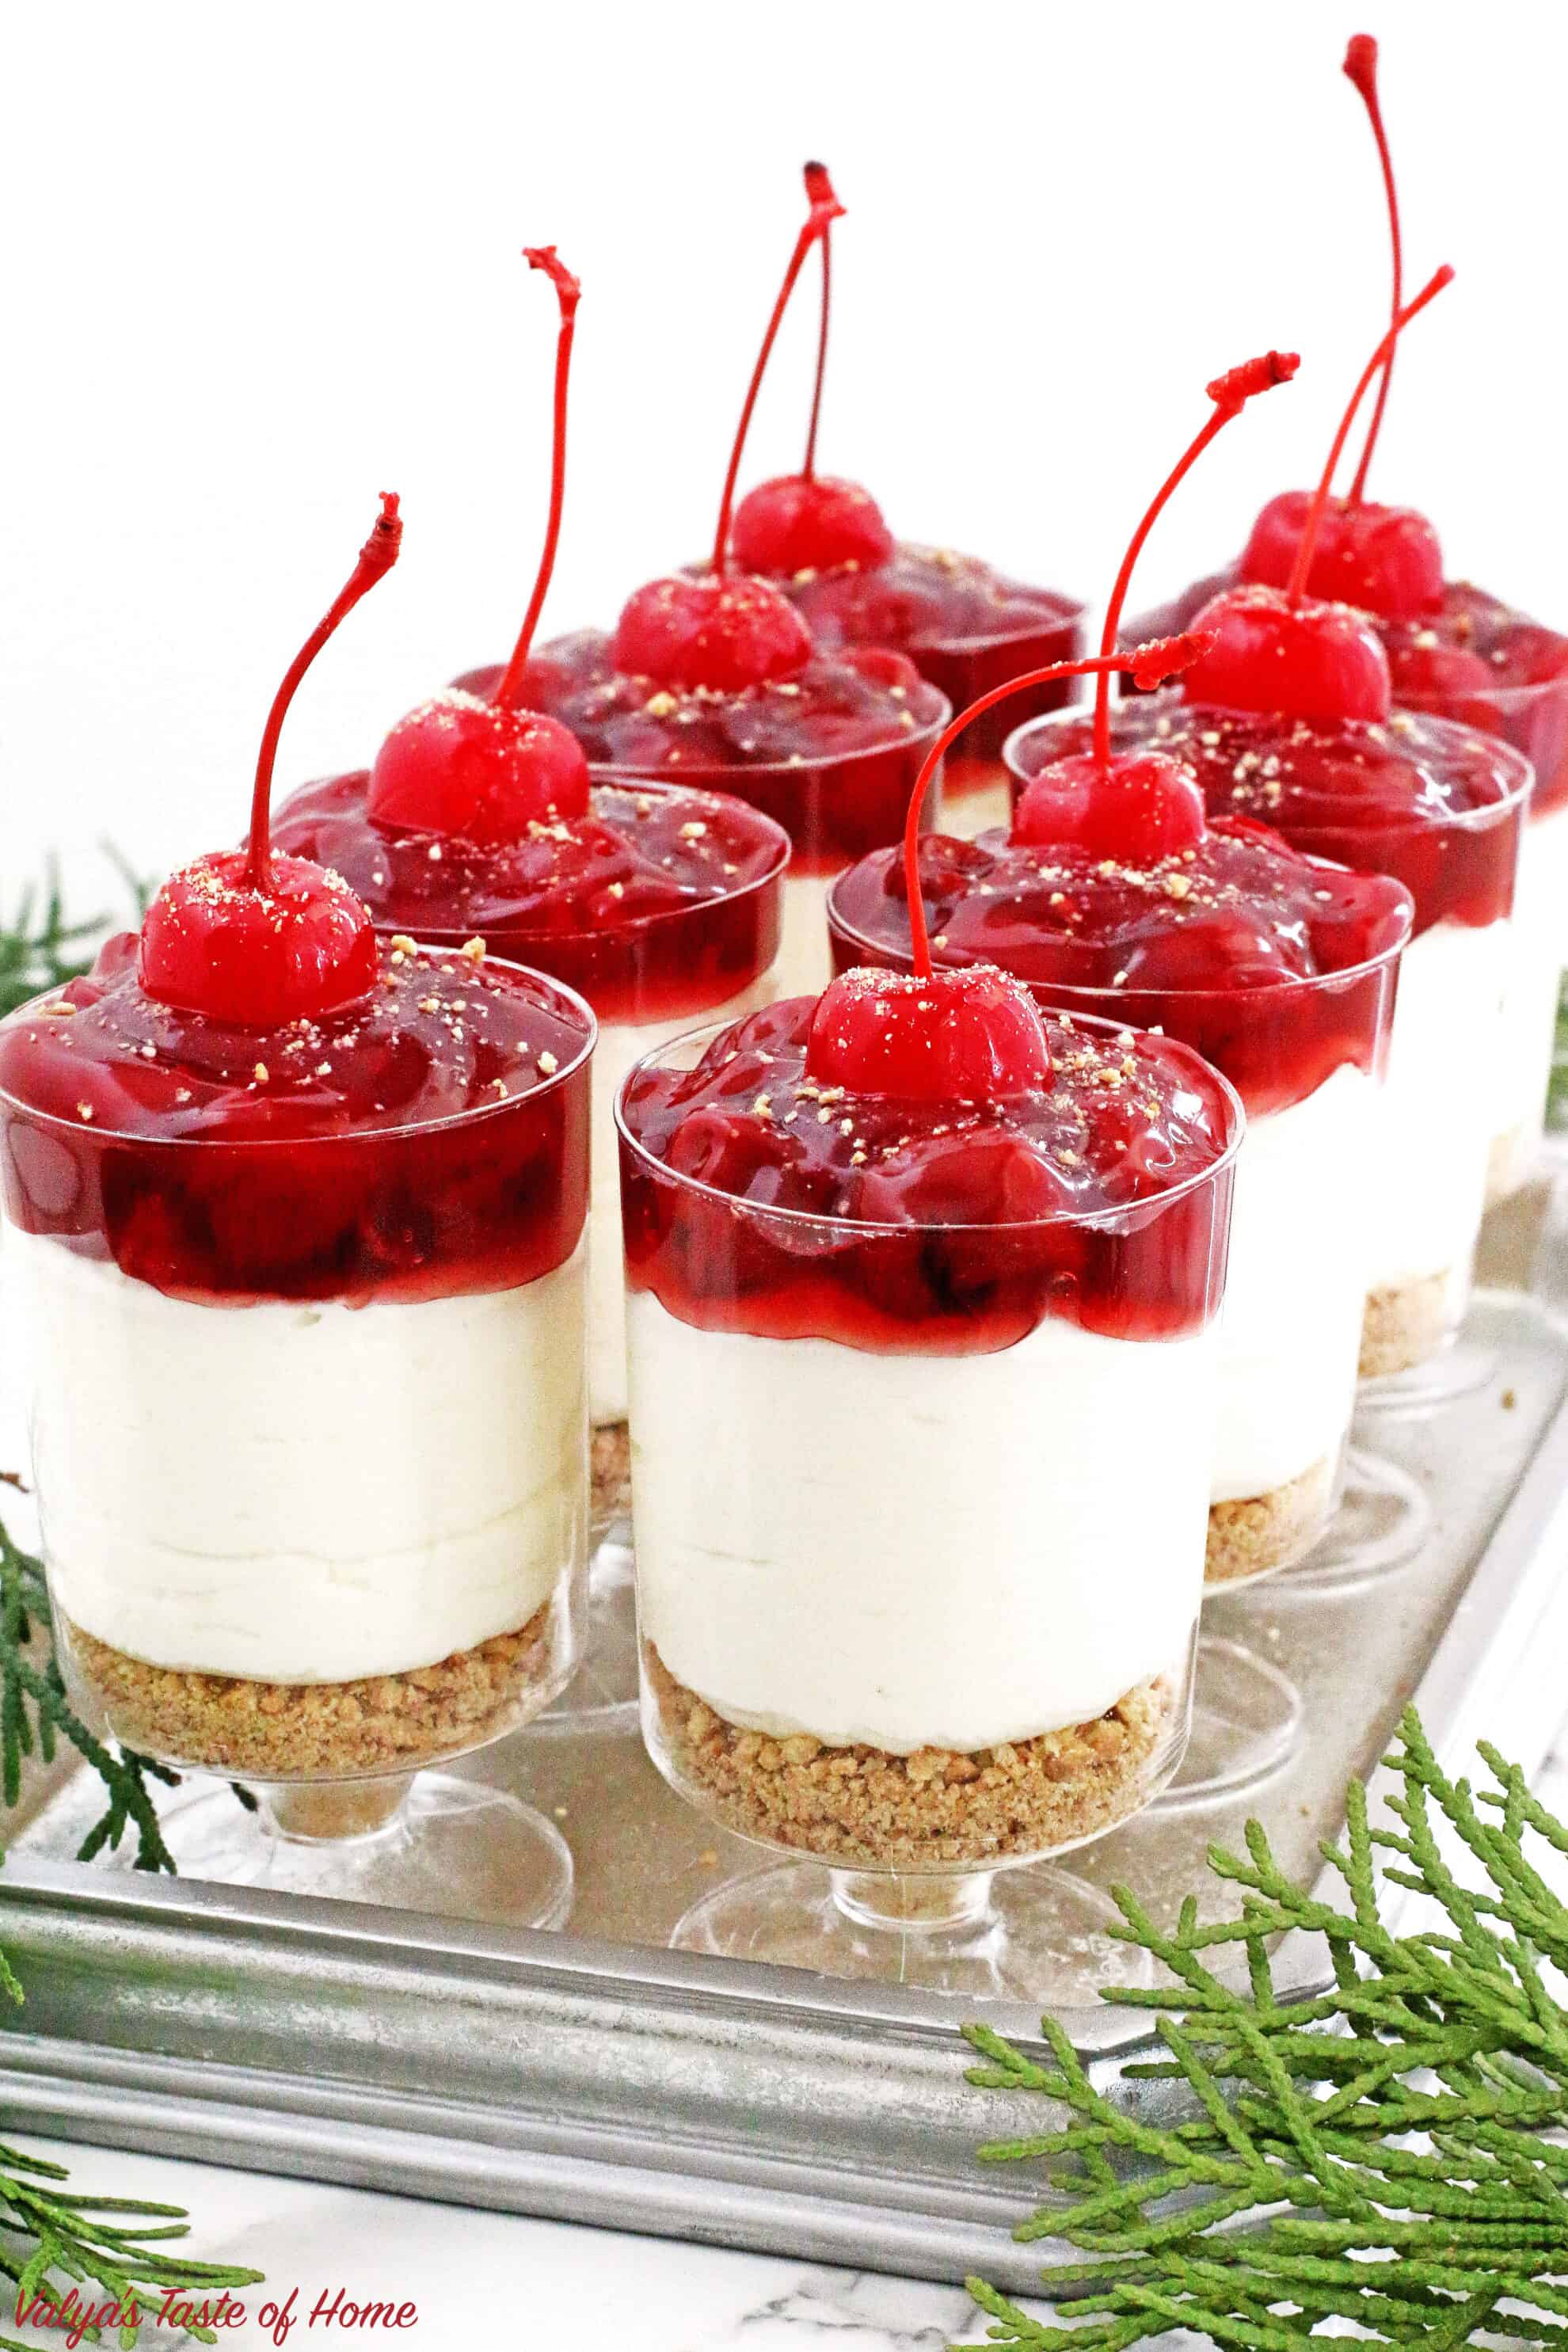 These No Bake​ Cherry Cheesecake Parfaits are not only beautiful, but they are delicious, perfectly portioned décor dessert that is any party friendly.